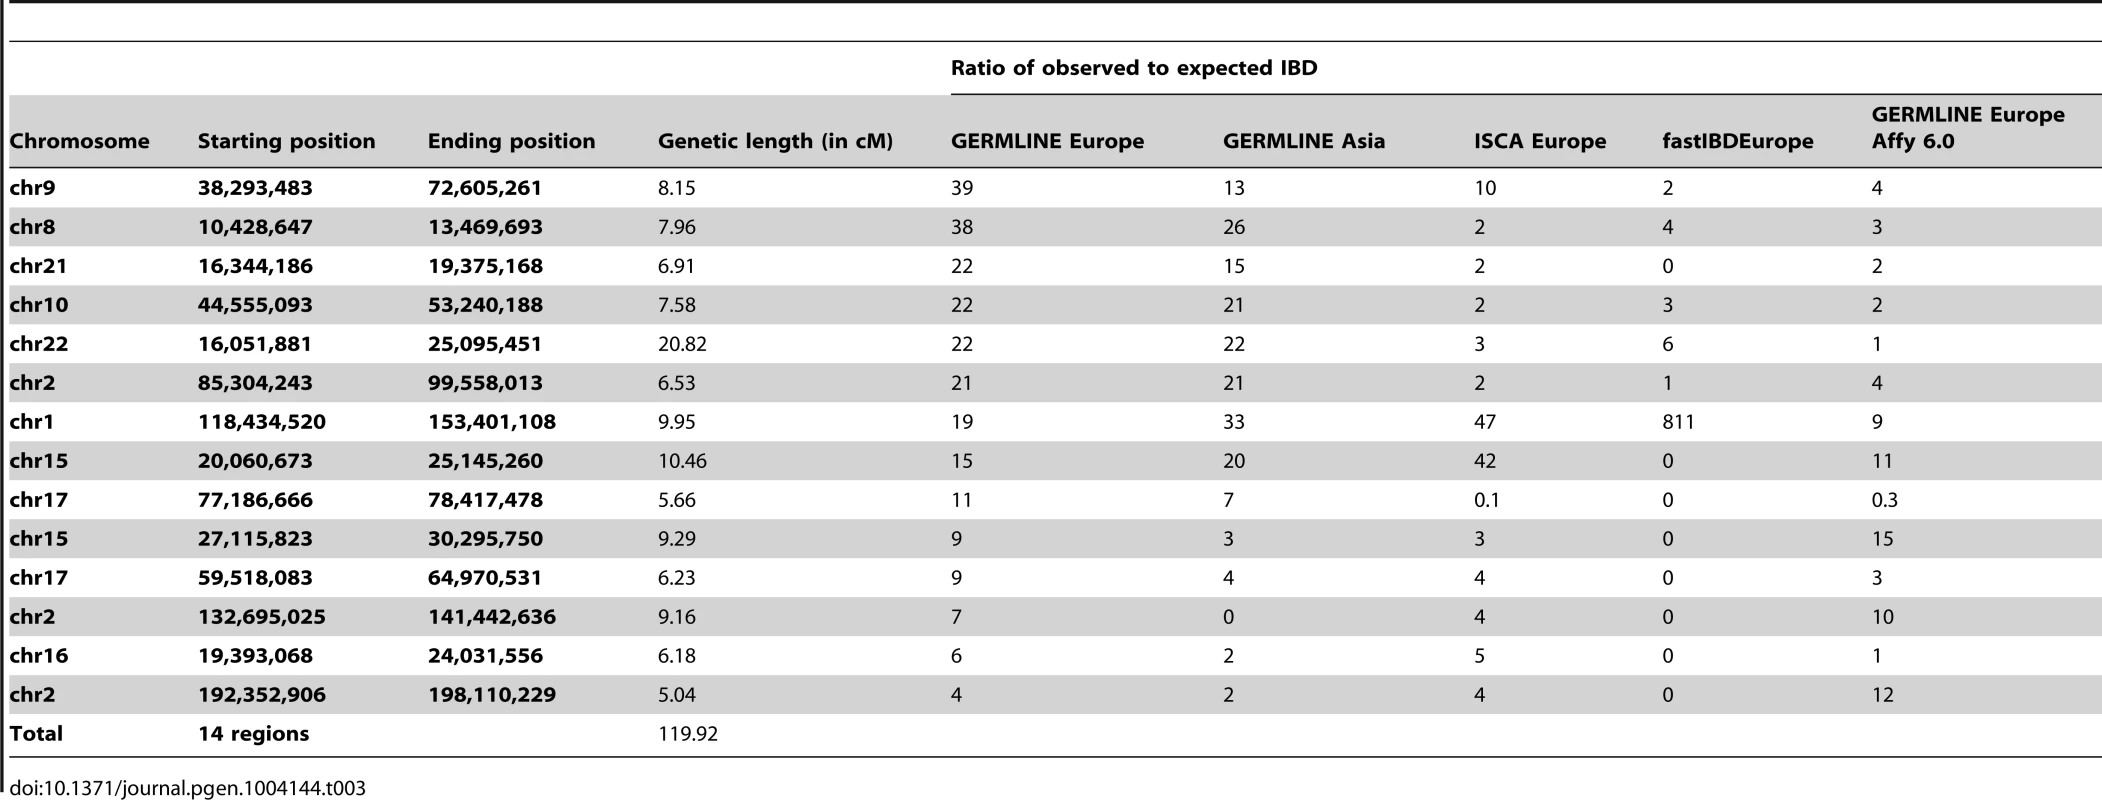 Genomic Regions in hg19 coordinates of at least 5-to-expected IBD of at least 4-fold.